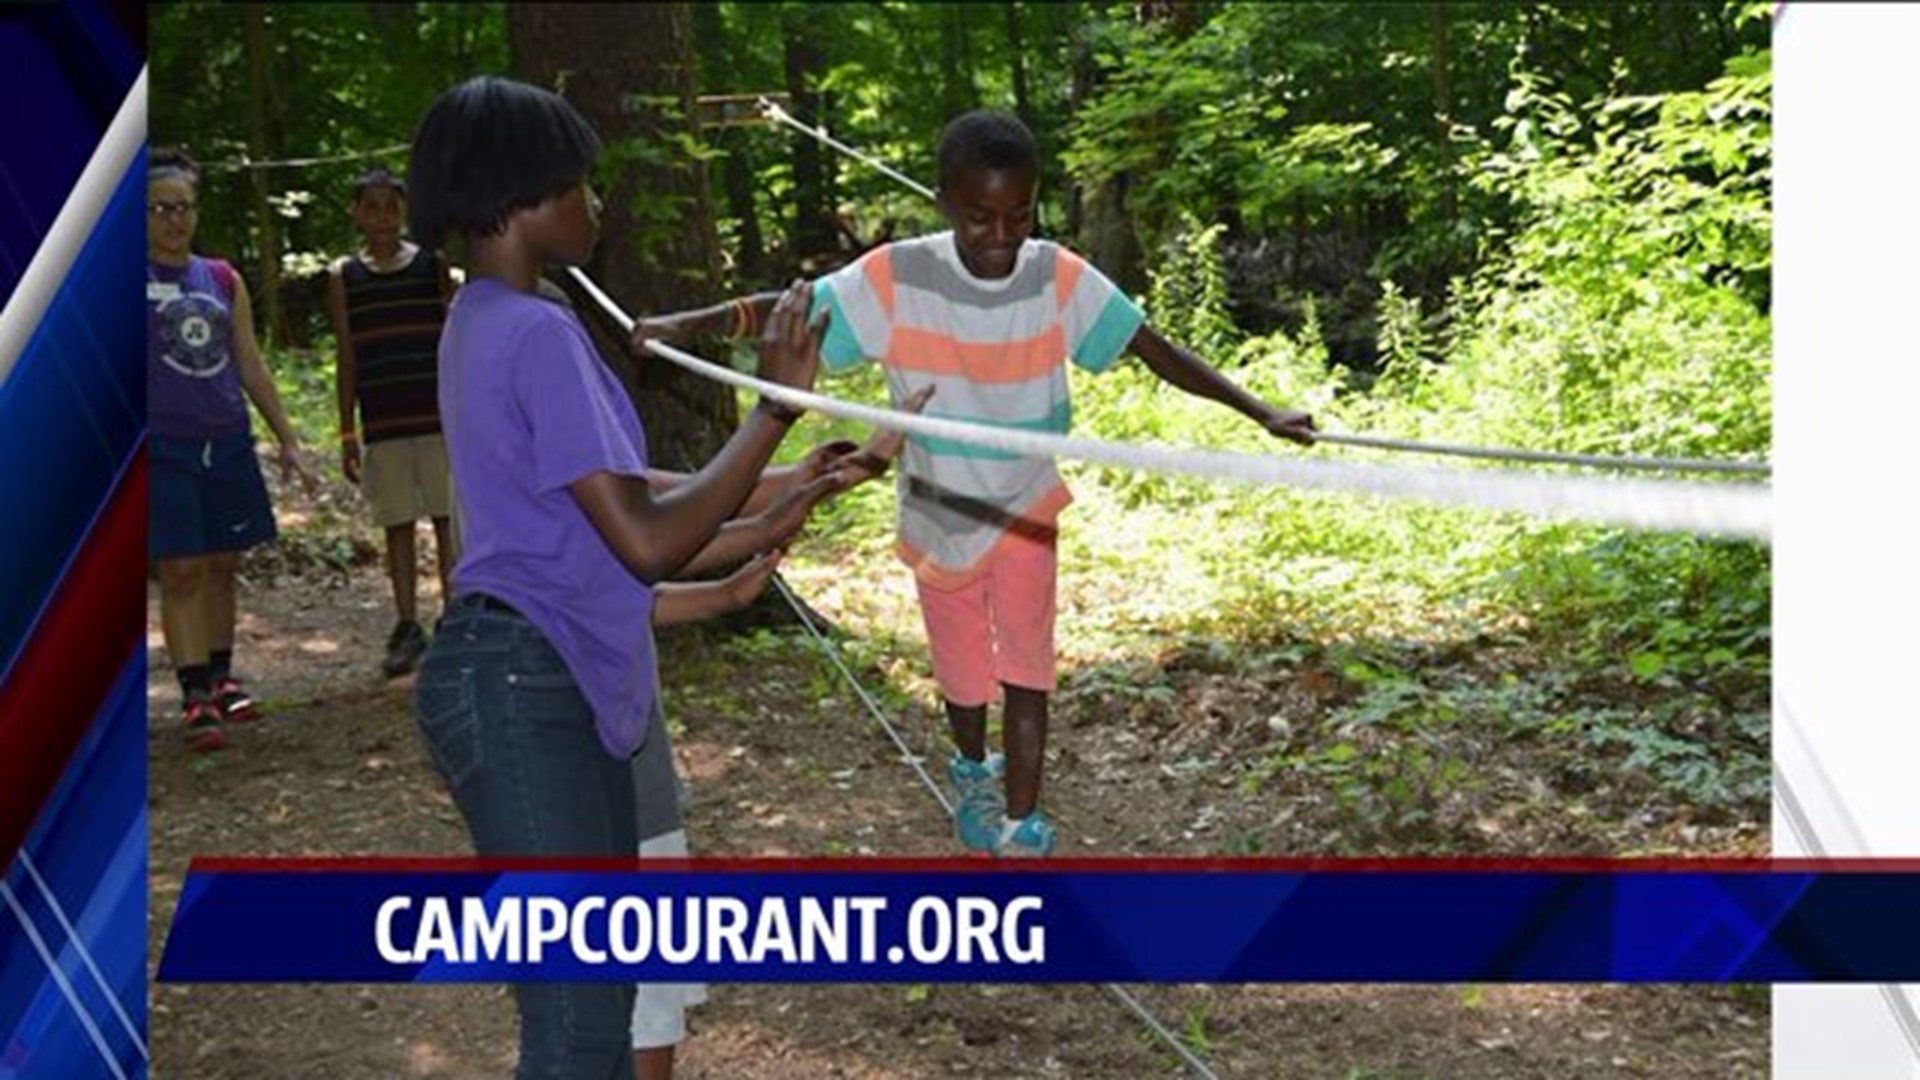 Camp Courant